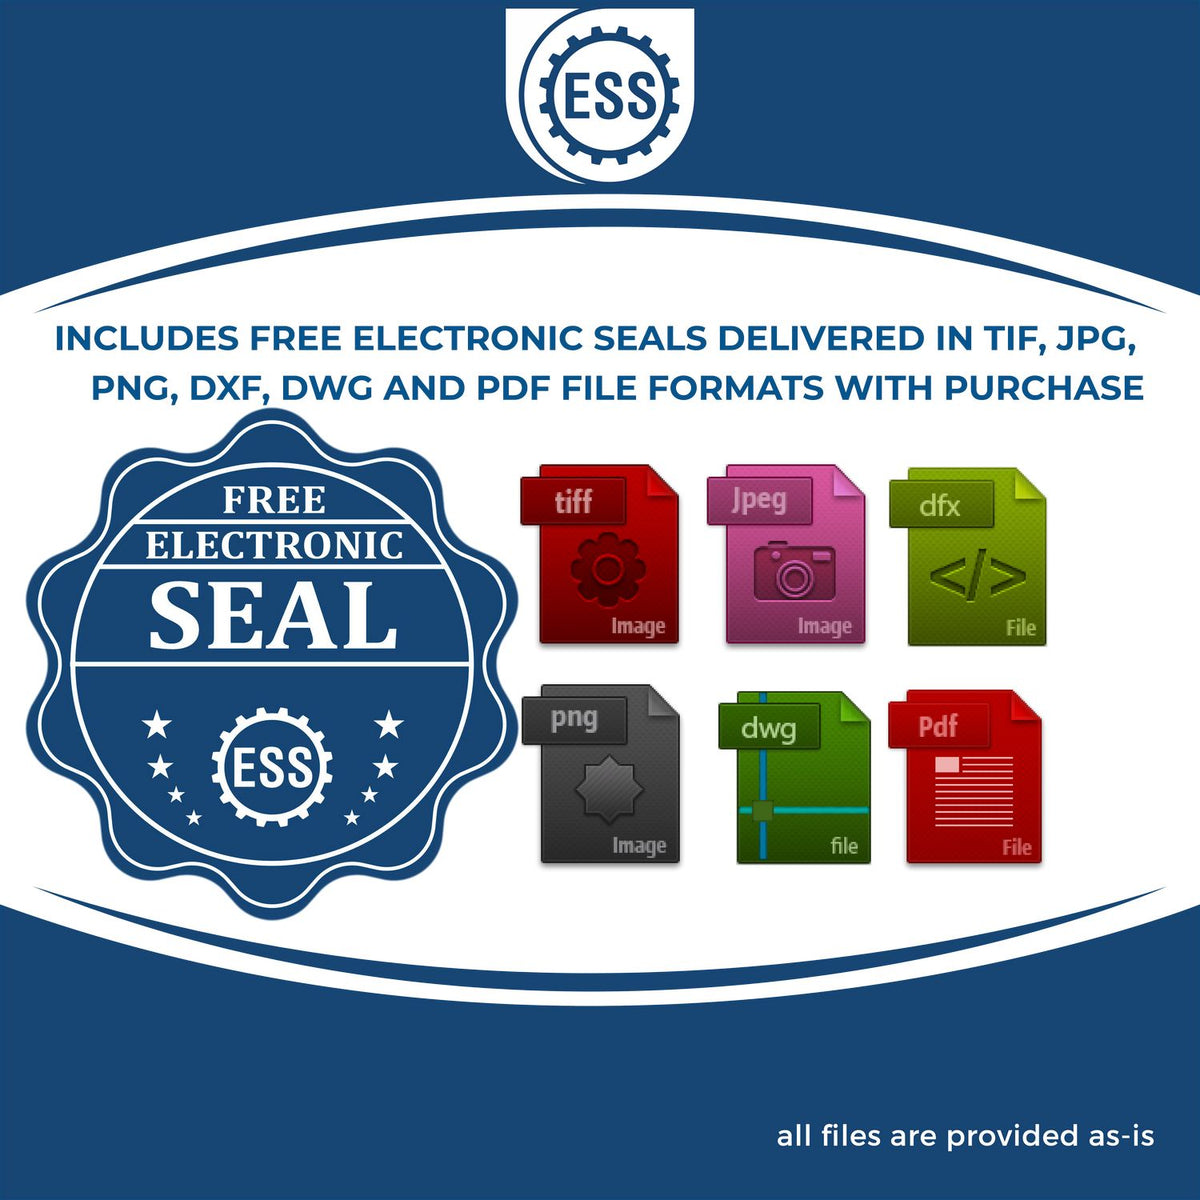 An infographic for the free electronic seal for the Hybrid Florida Geologist Seal illustrating the different file type icons such as DXF, DWG, TIF, JPG and PNG.